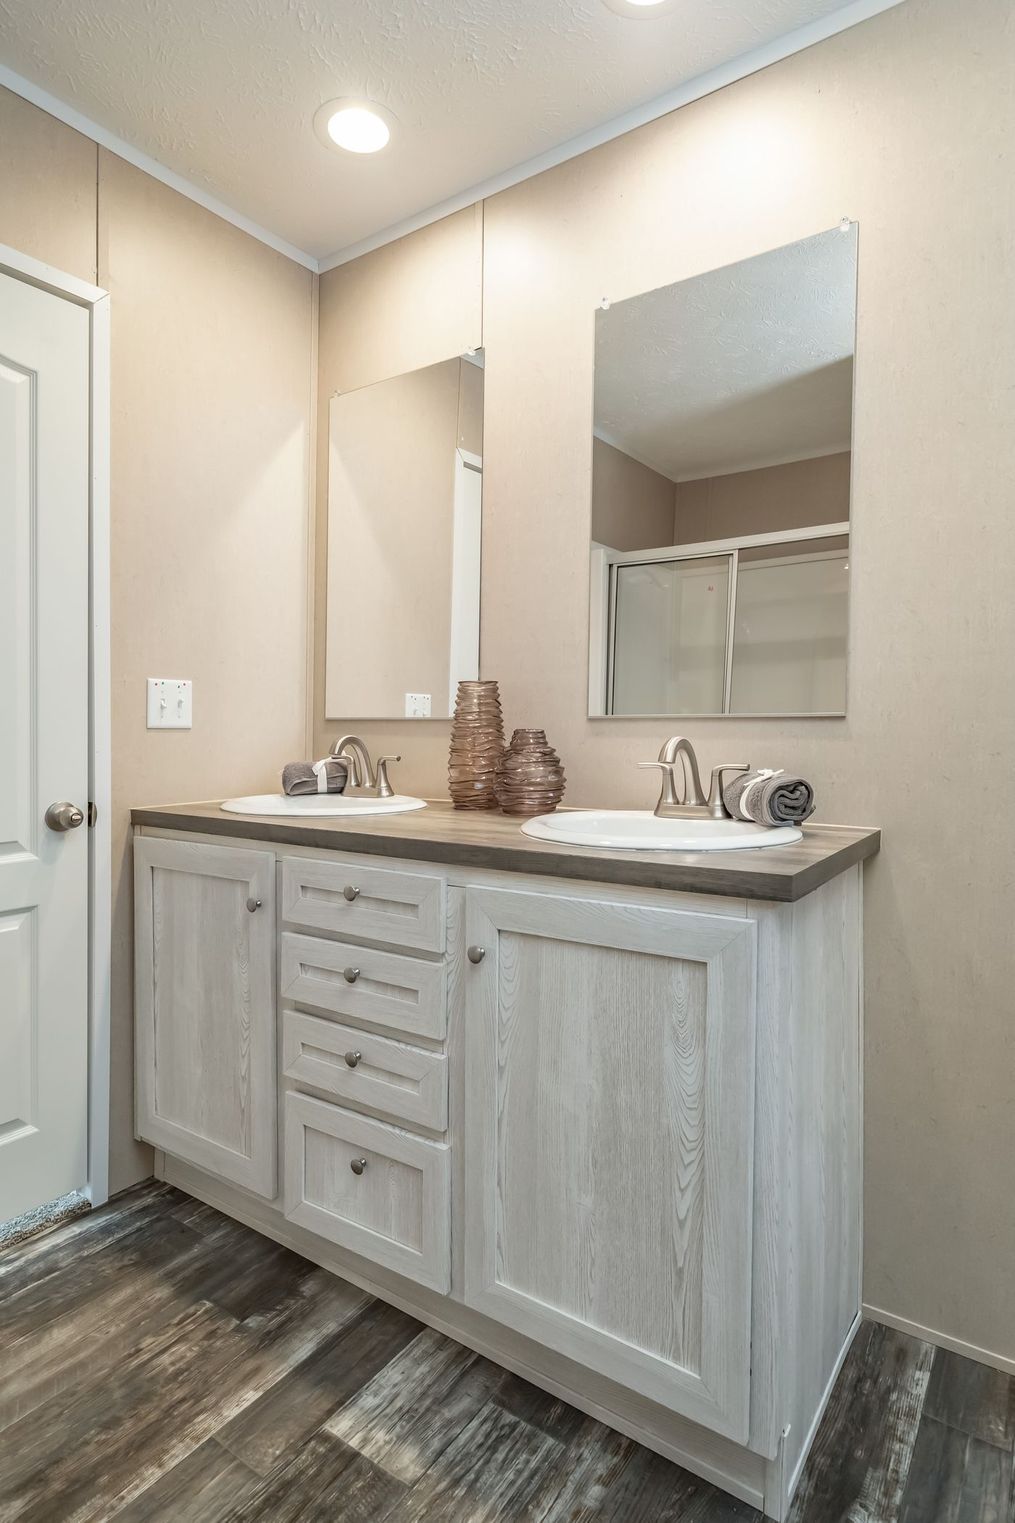 The ULTRA EXCEL 3 BR 28X56 Primary Bathroom. This Manufactured Mobile Home features 3 bedrooms and 2 baths.